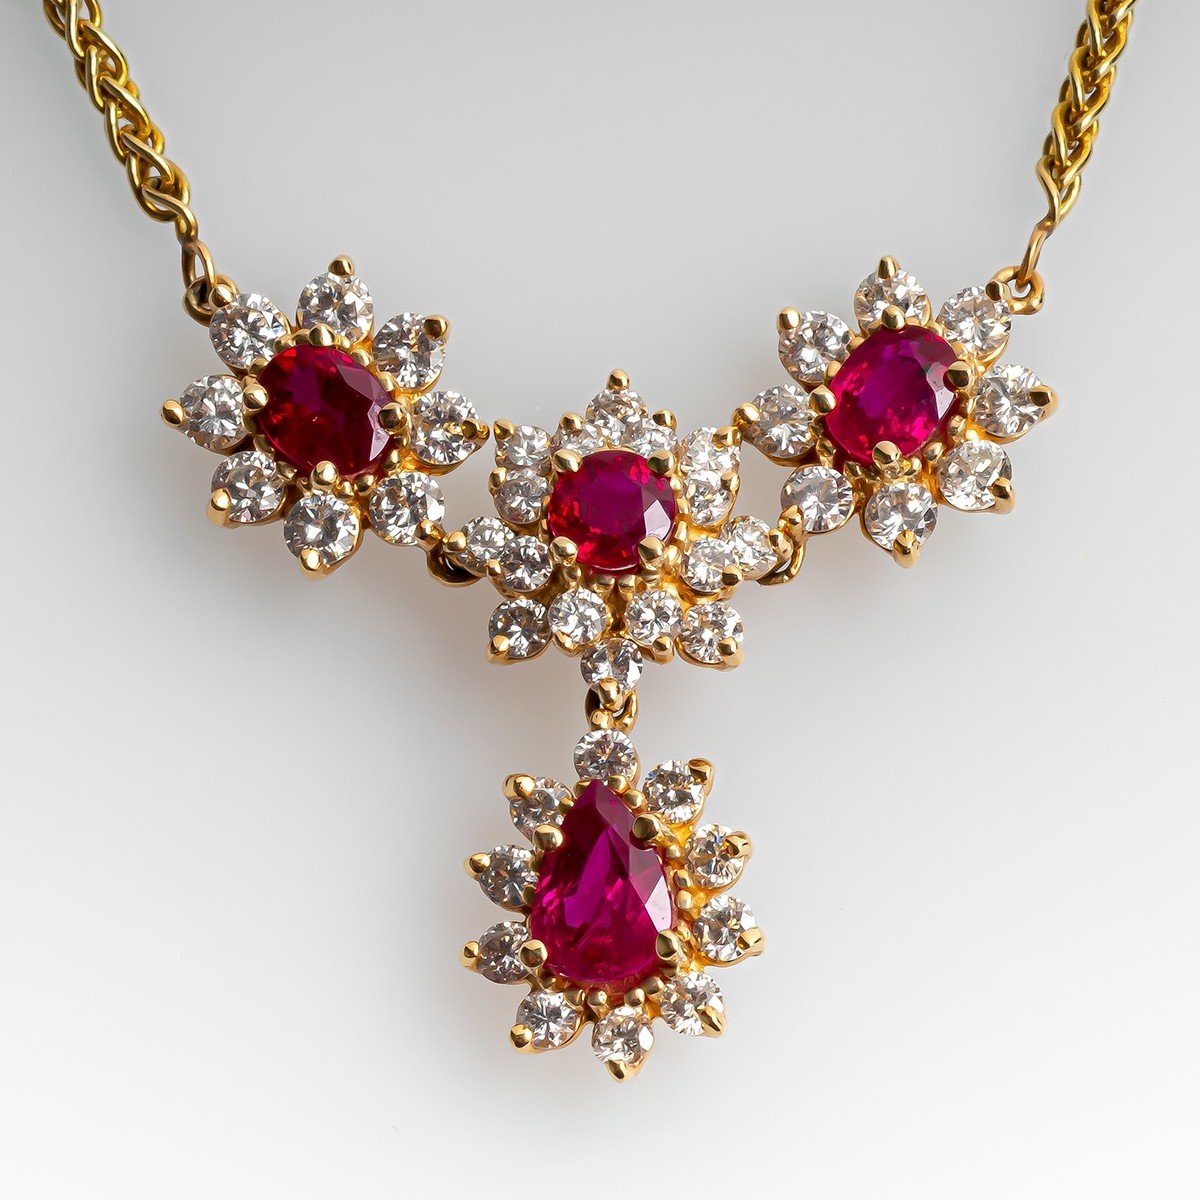 6-7mm Cultured Pearl and 10.00 Carat Ruby Necklace in 14kt Yellow Gold |  Ross-Simons